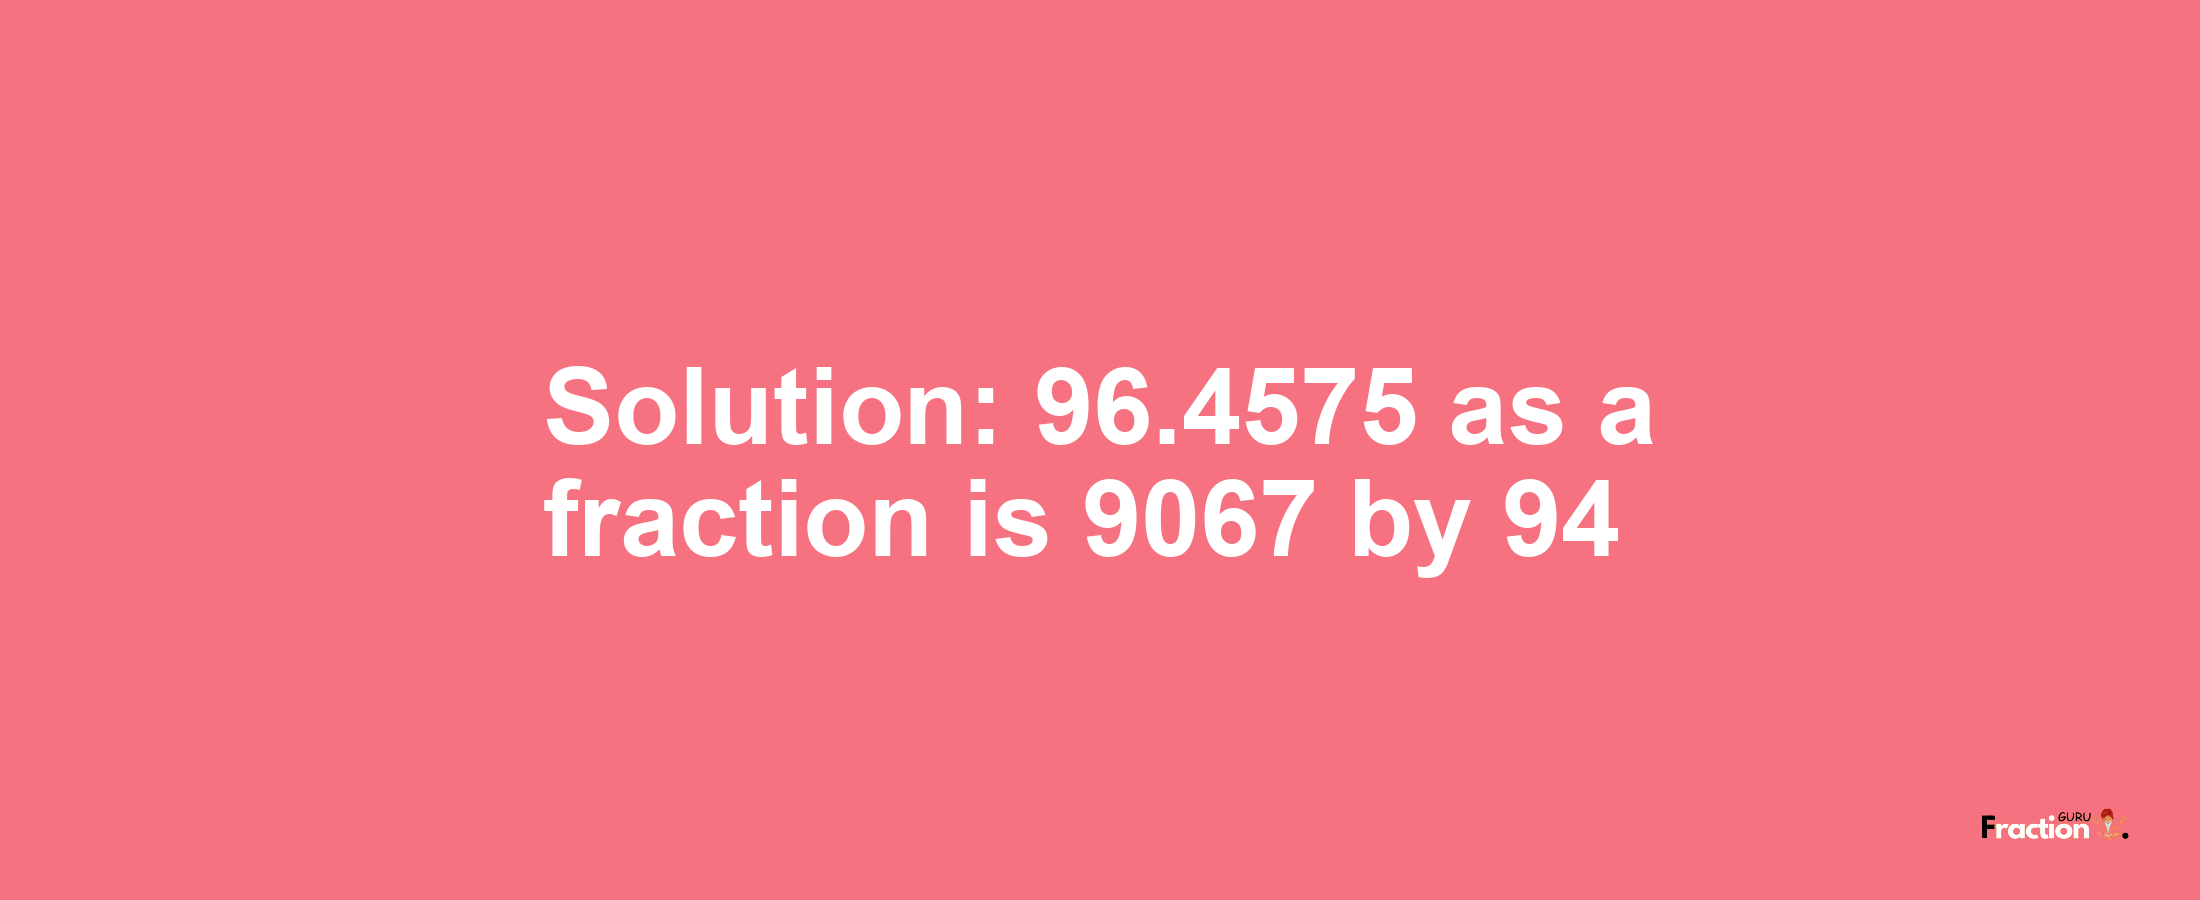 Solution:96.4575 as a fraction is 9067/94